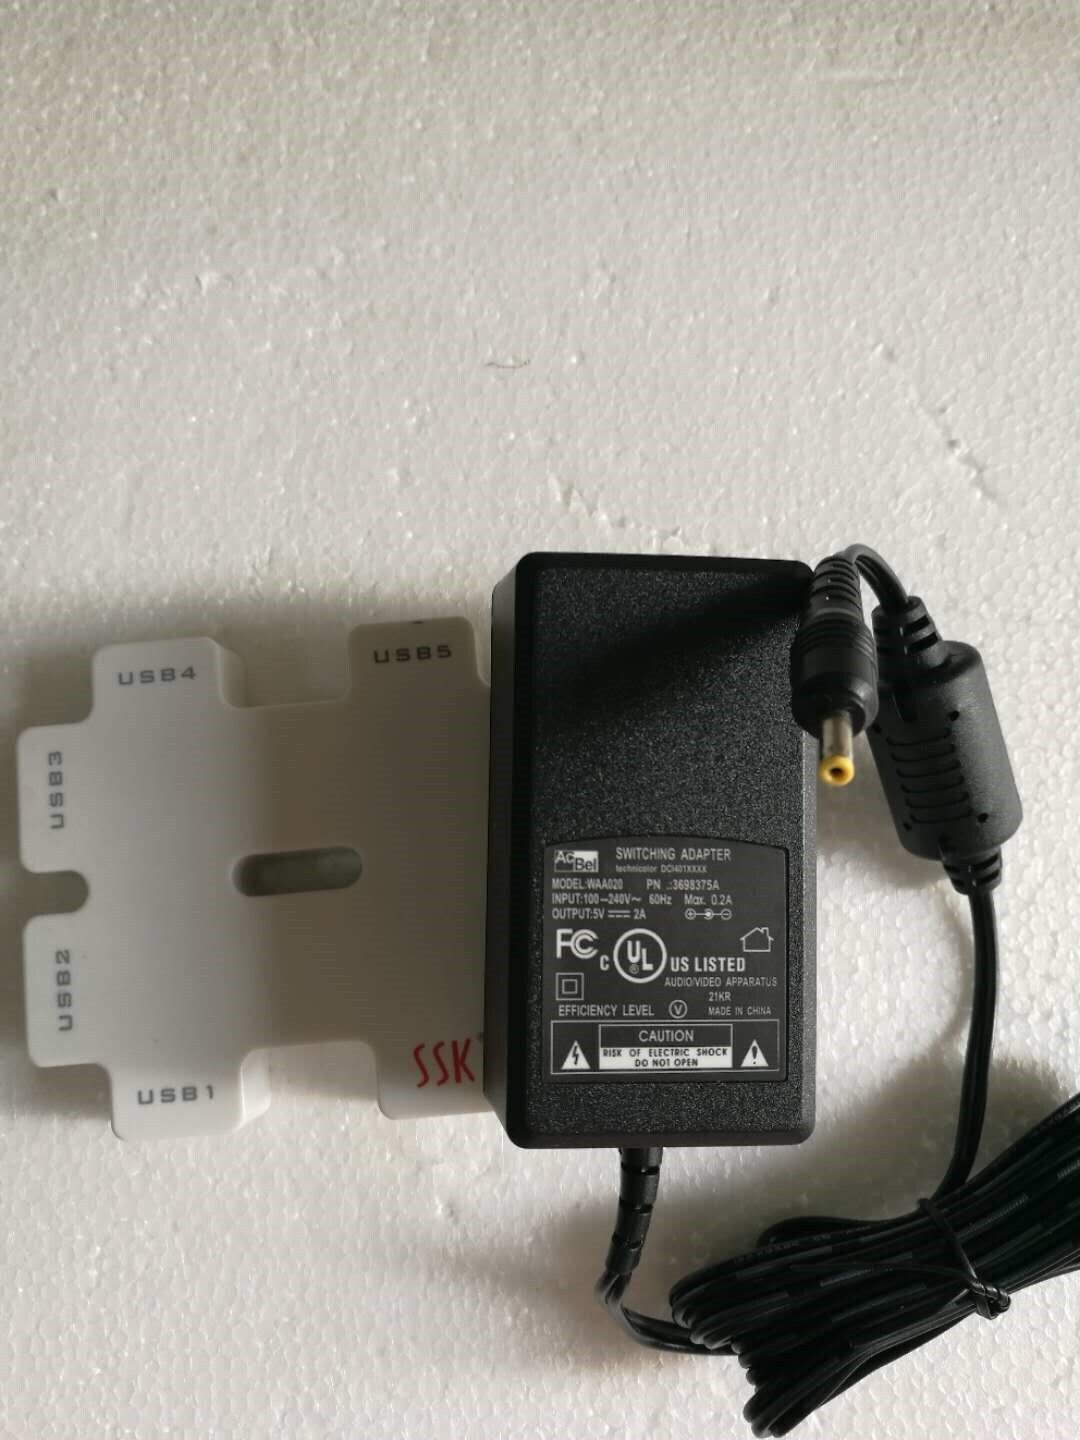 Genuine AcBel AC Adapter WAA020 5V 2A Power Supply 3.5*1.35mm Brand AcBel Type AC Adapter Compatible Brand For AcBel C